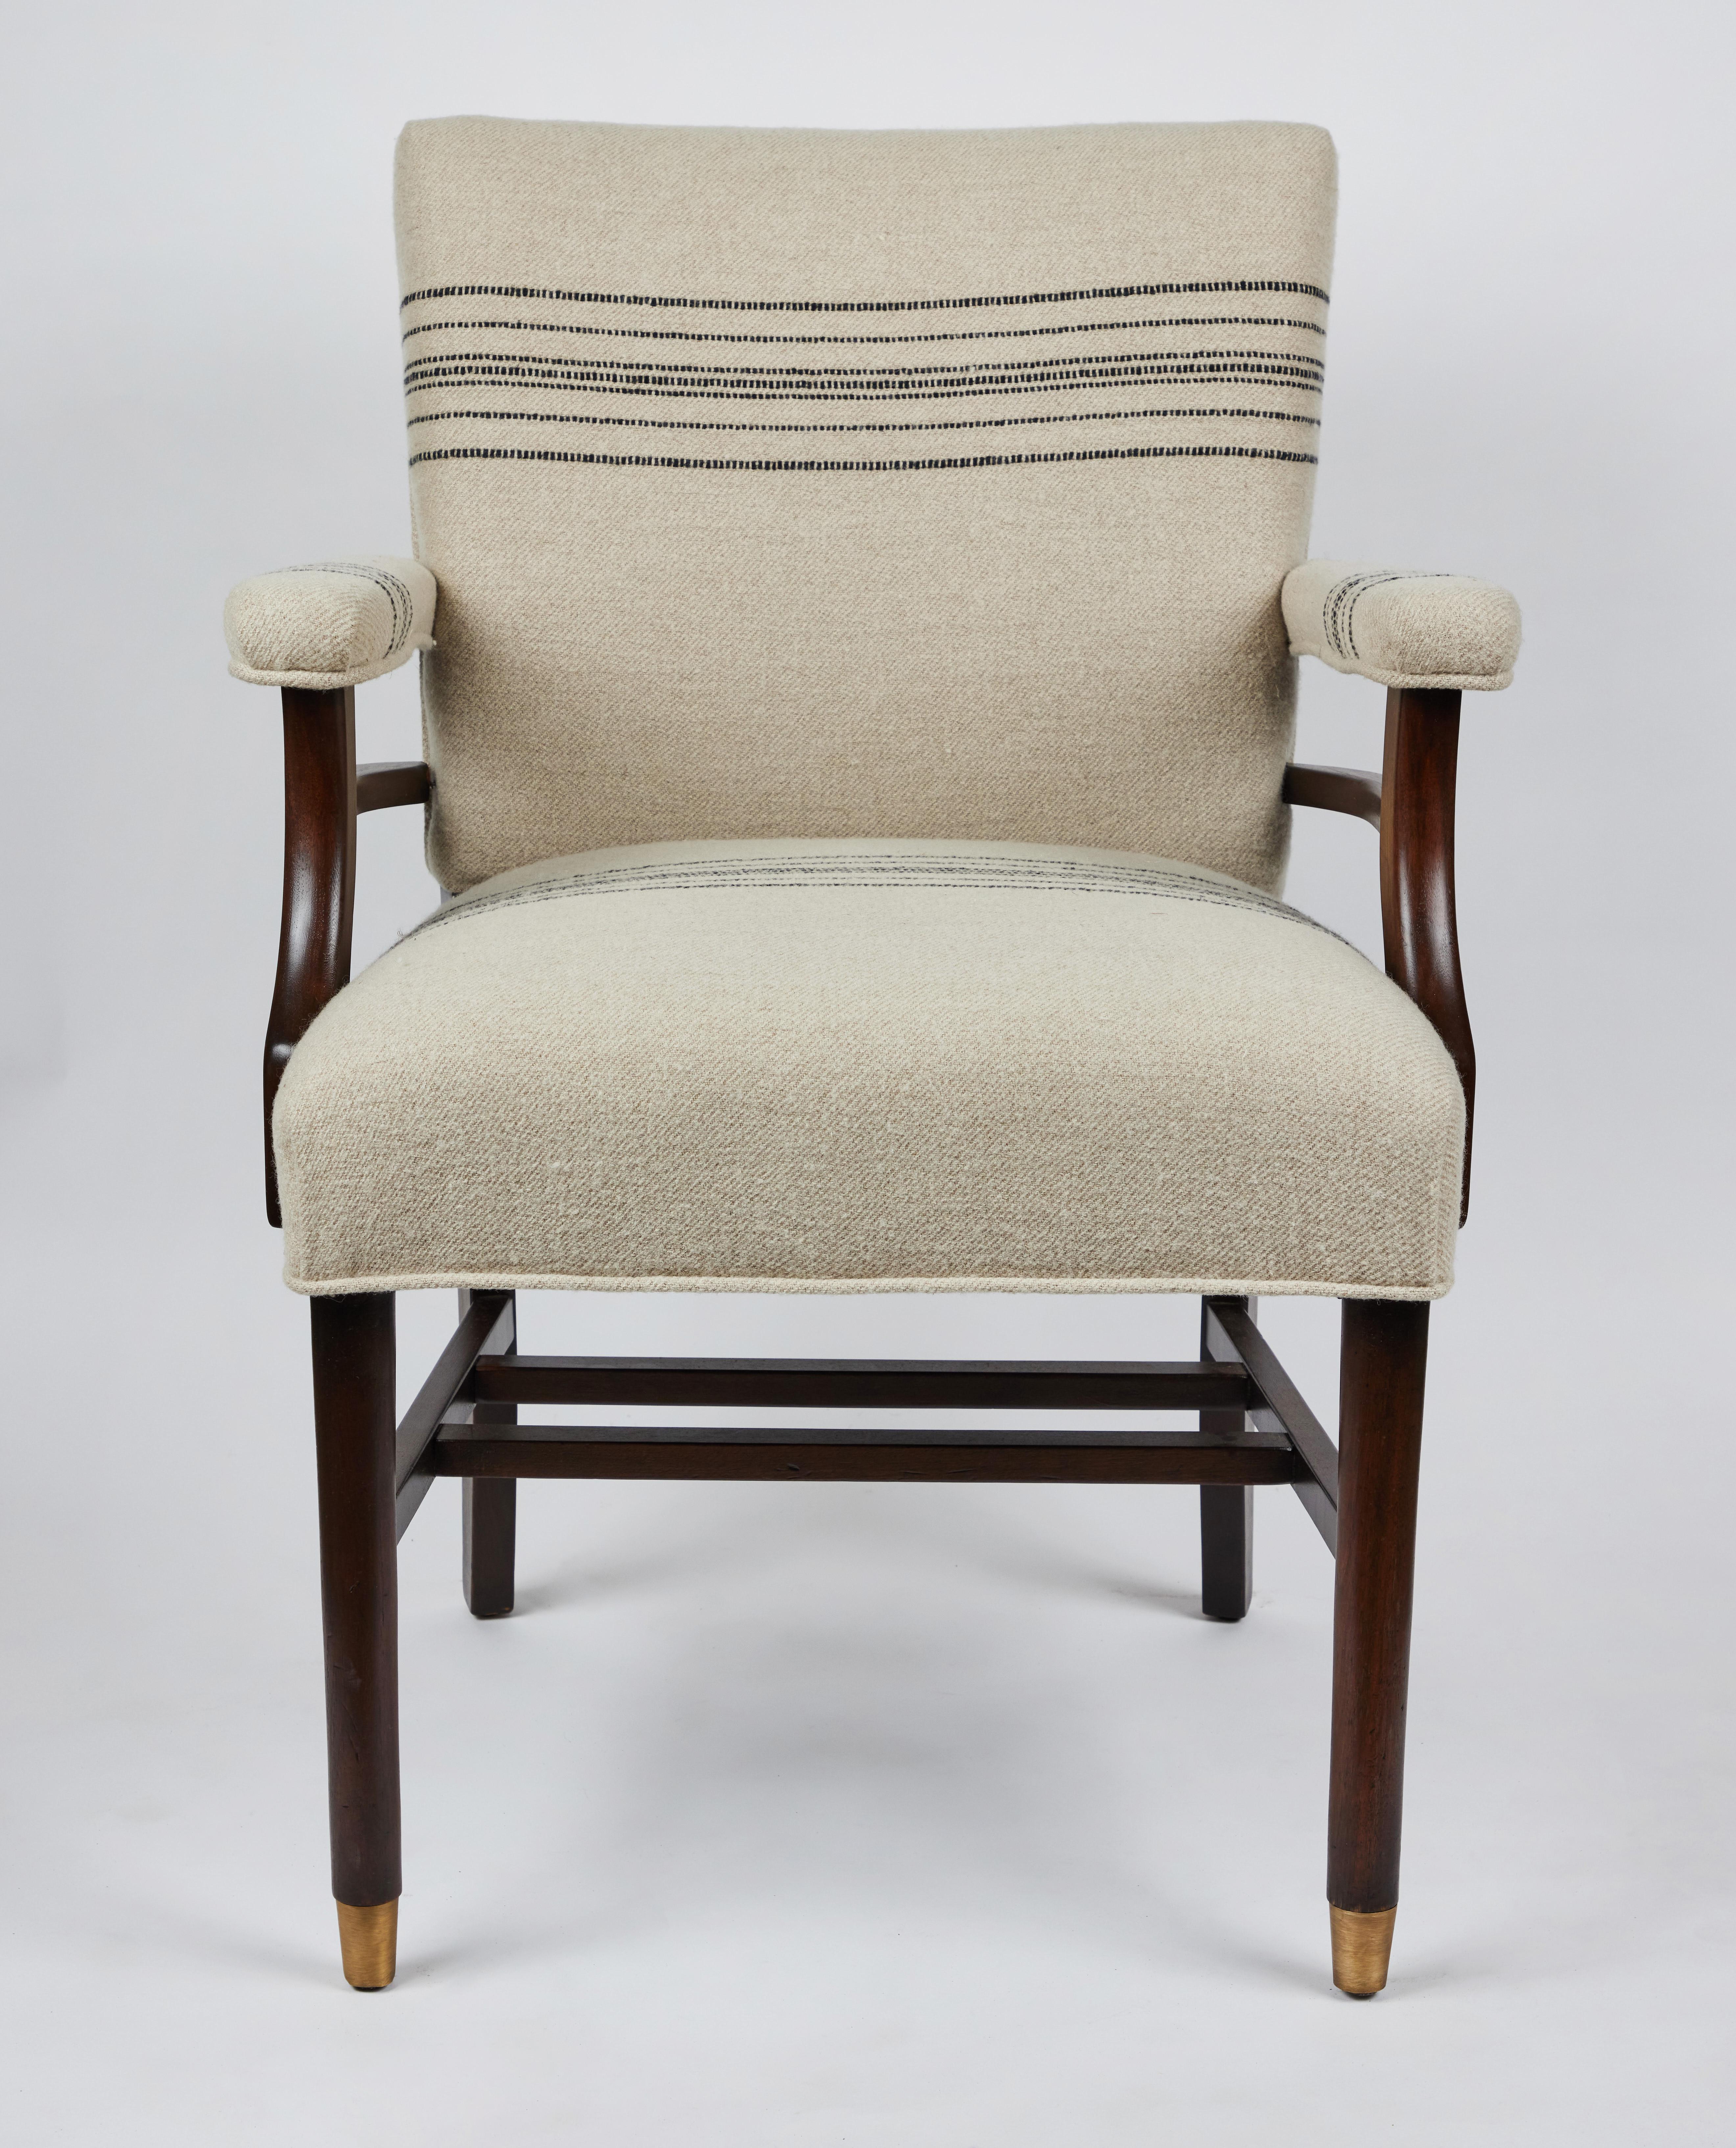 Mid century wood framed arm chairs newly upholstered in a wool & linen fabric from Belgium.